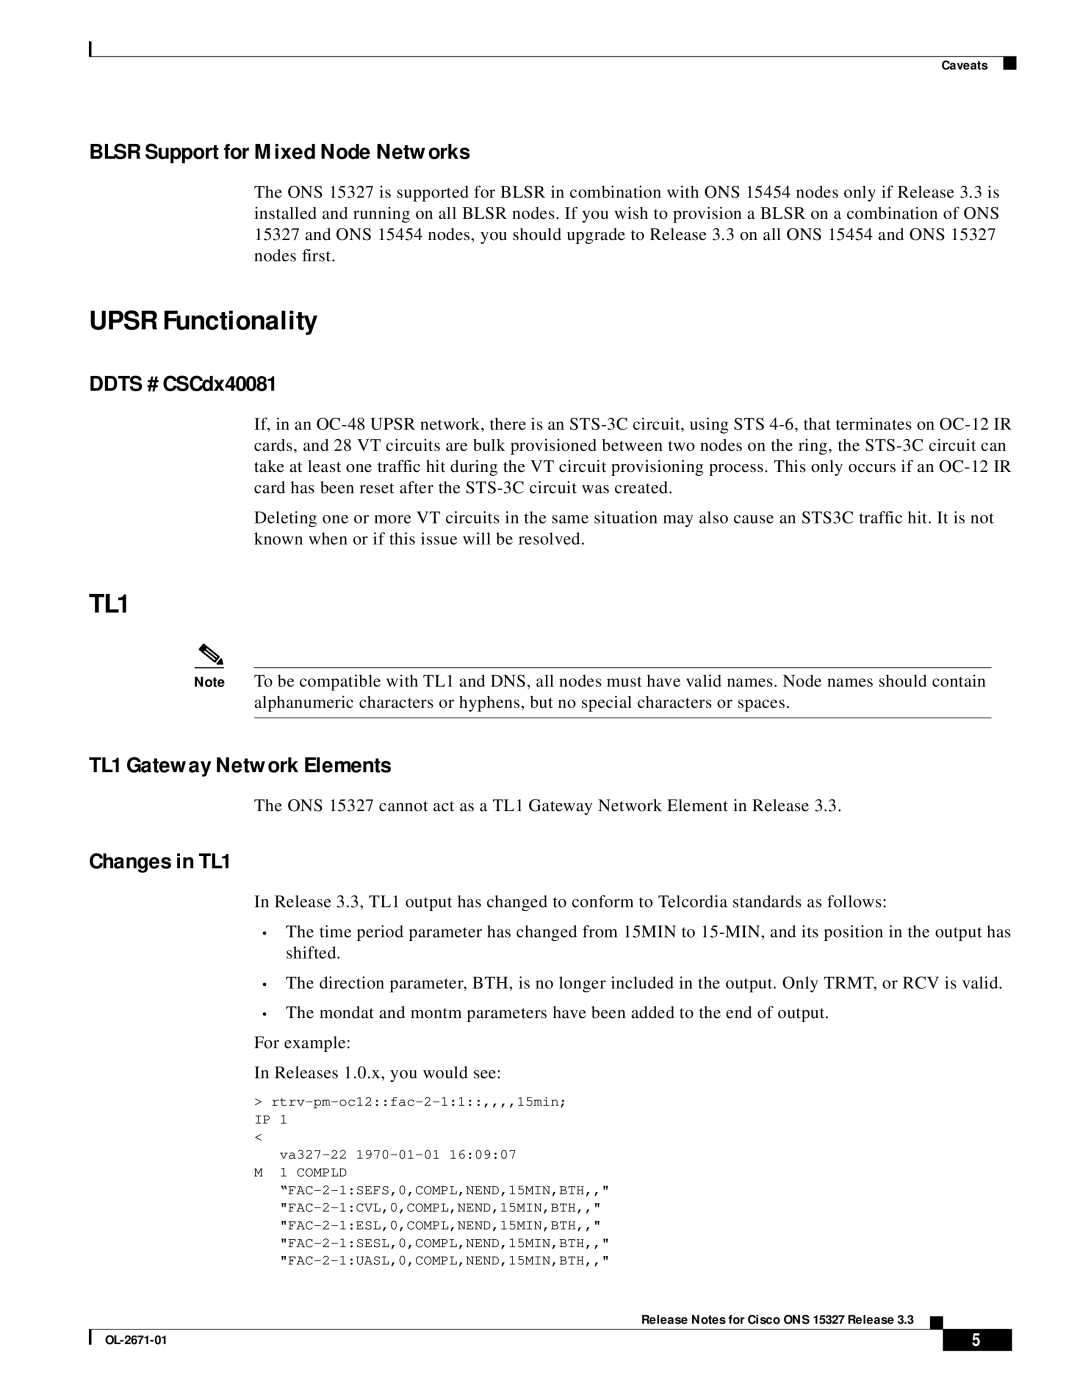 Cisco Systems ONS 15327 manual UPSR Functionality, BLSR Support for Mixed Node Networks, DDTS # CSCdx40081, Changes in TL1 